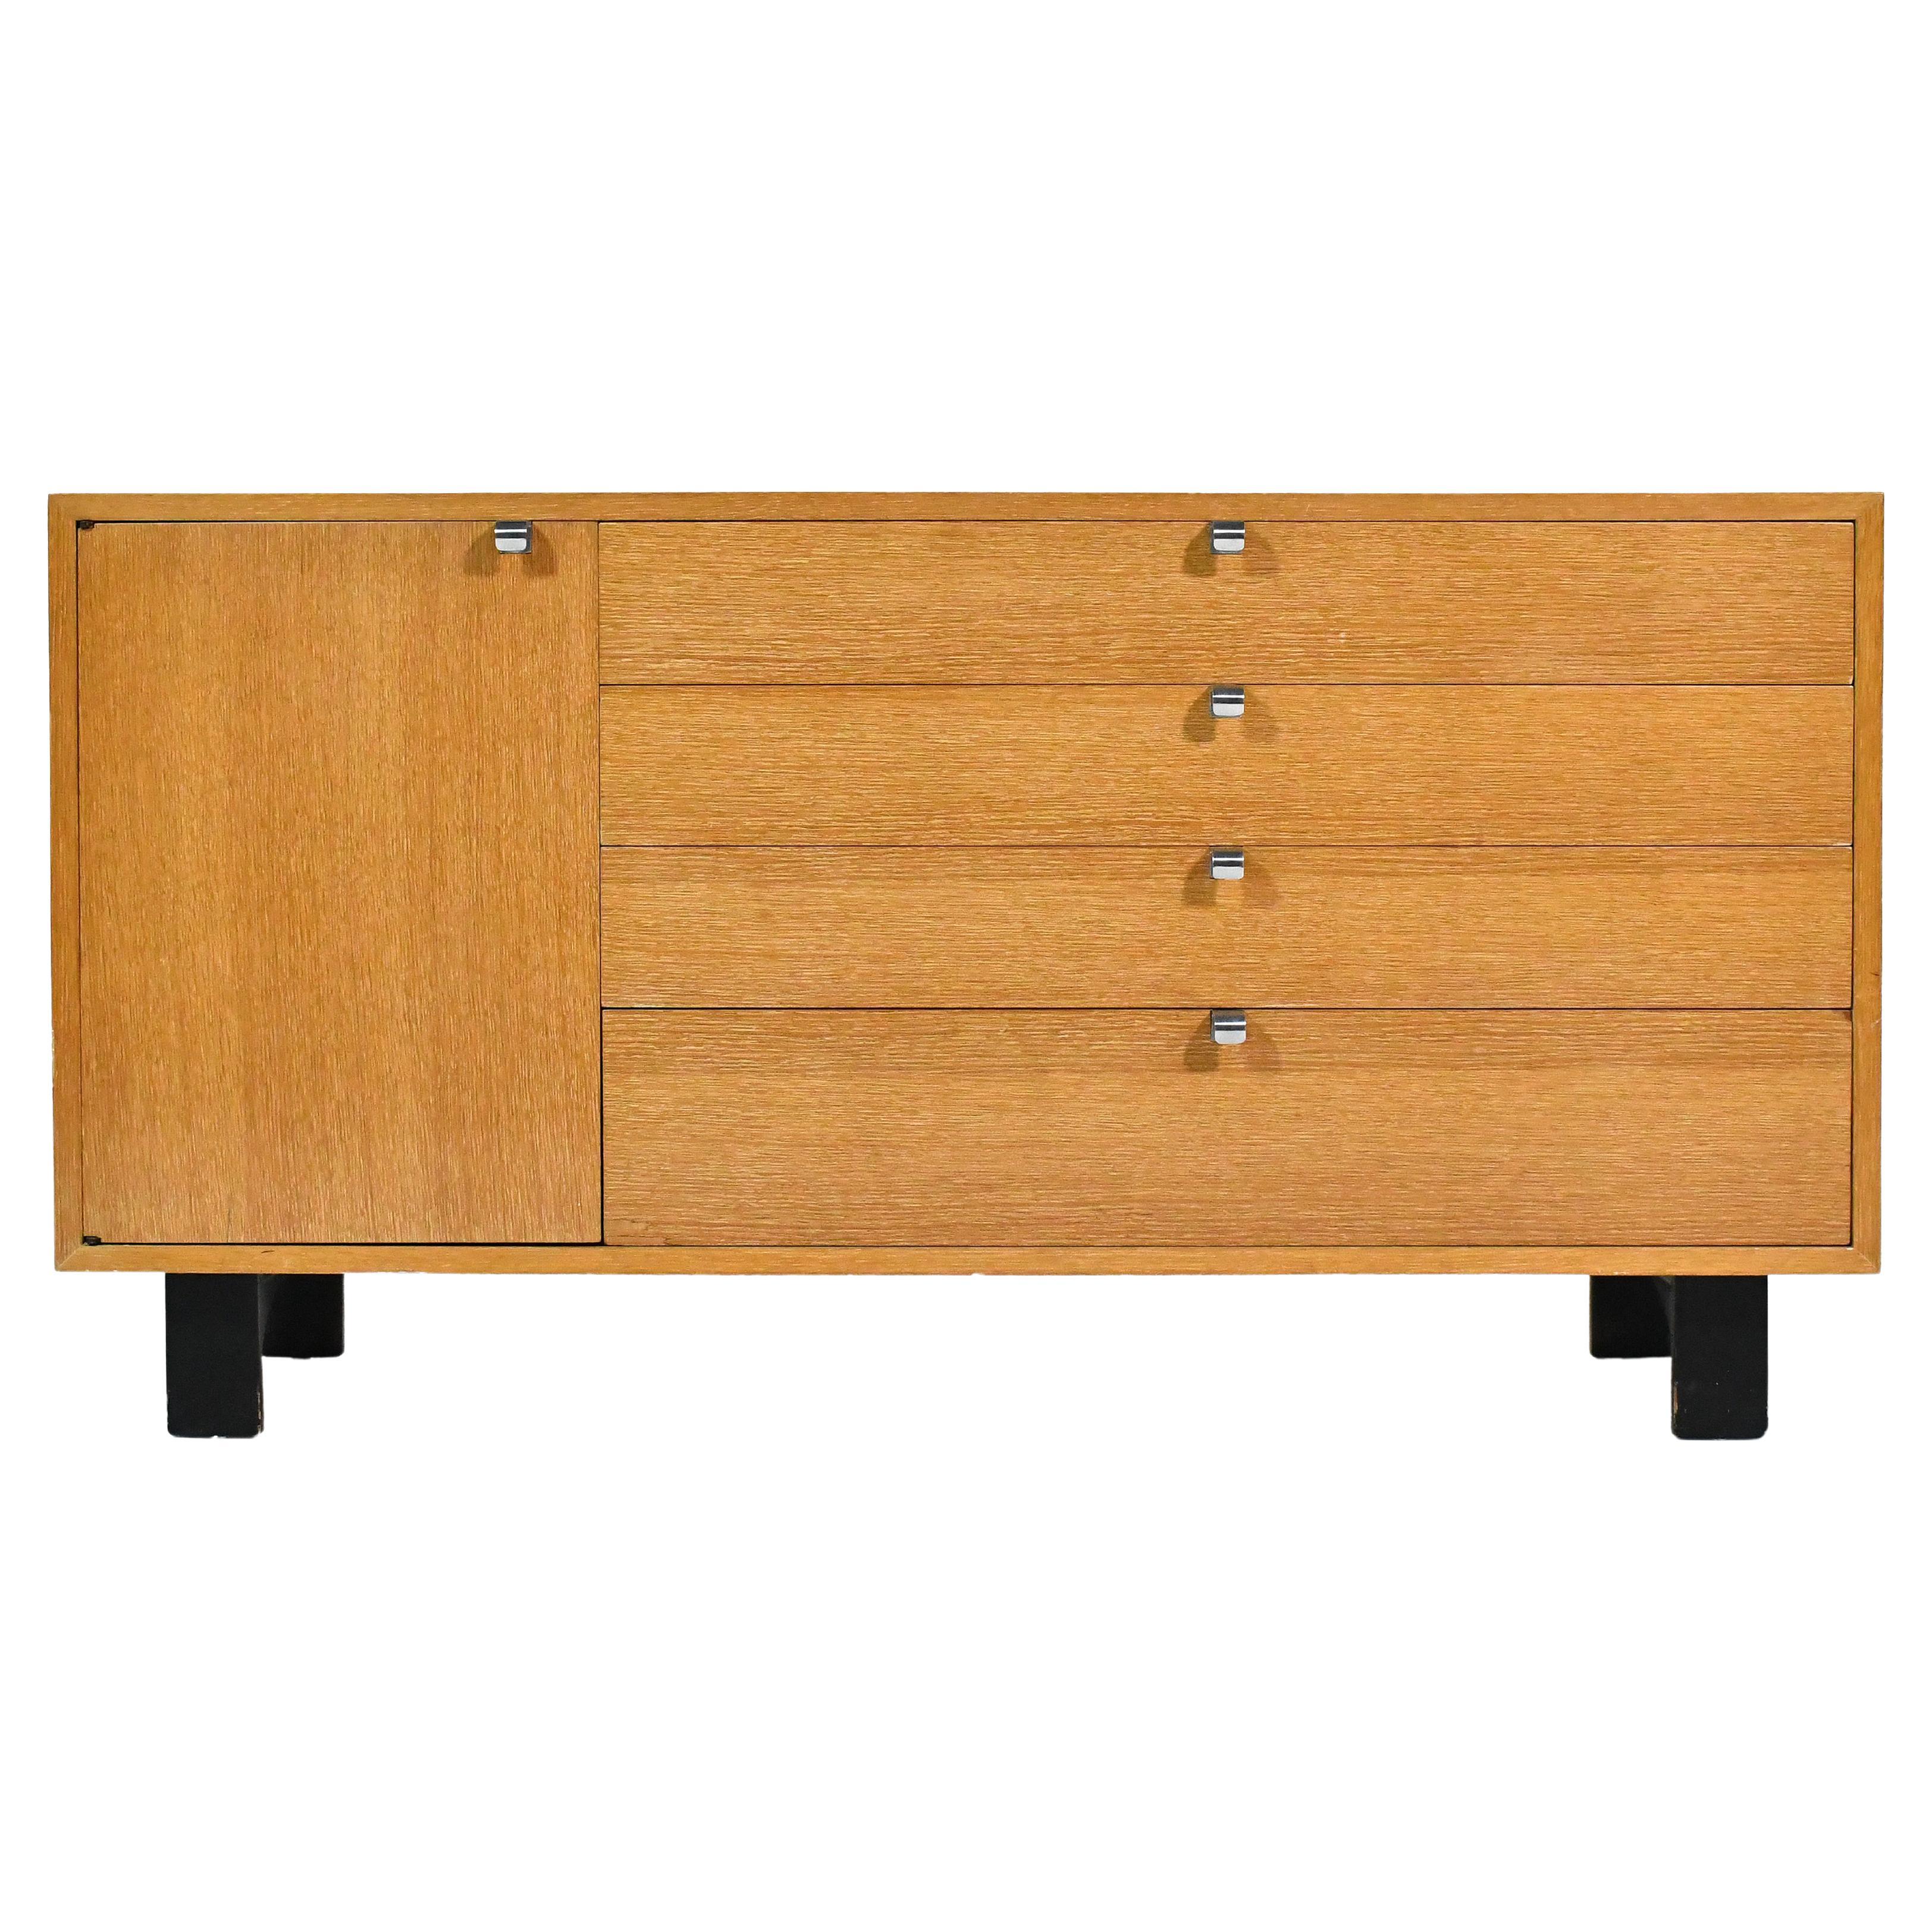 George Nelson Basic Cabinet Series Cabinet